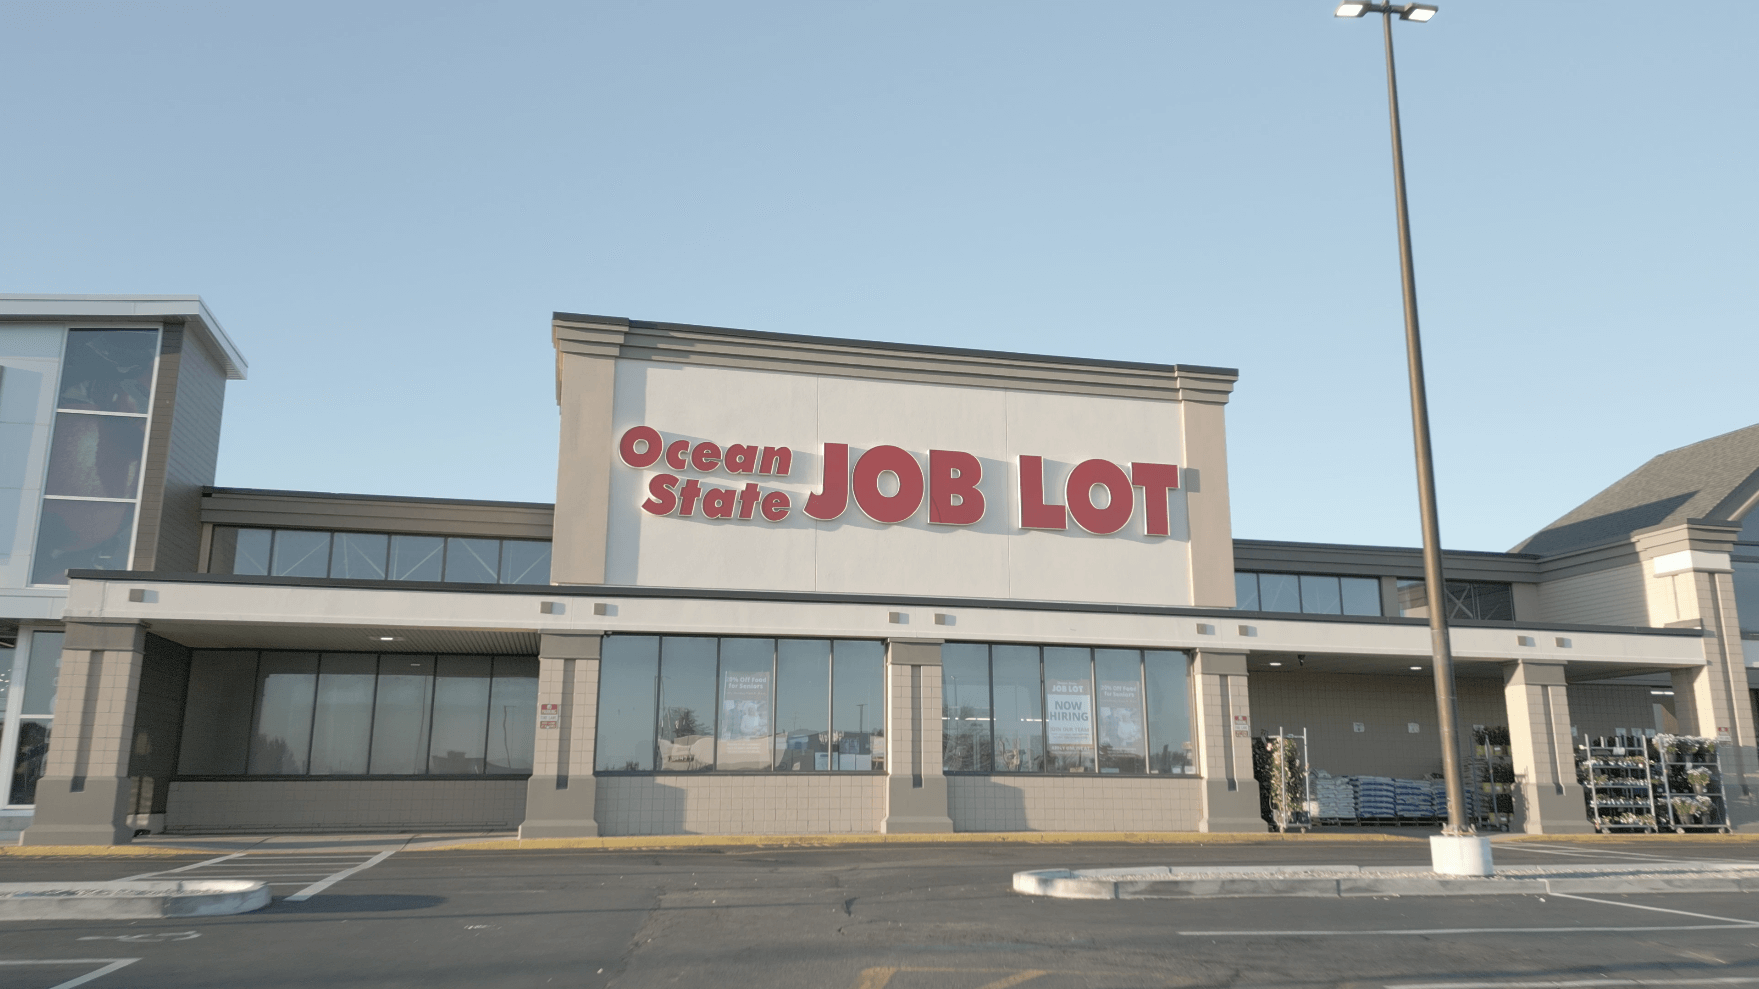 Front view of Ocean State Job Lot store with sign.